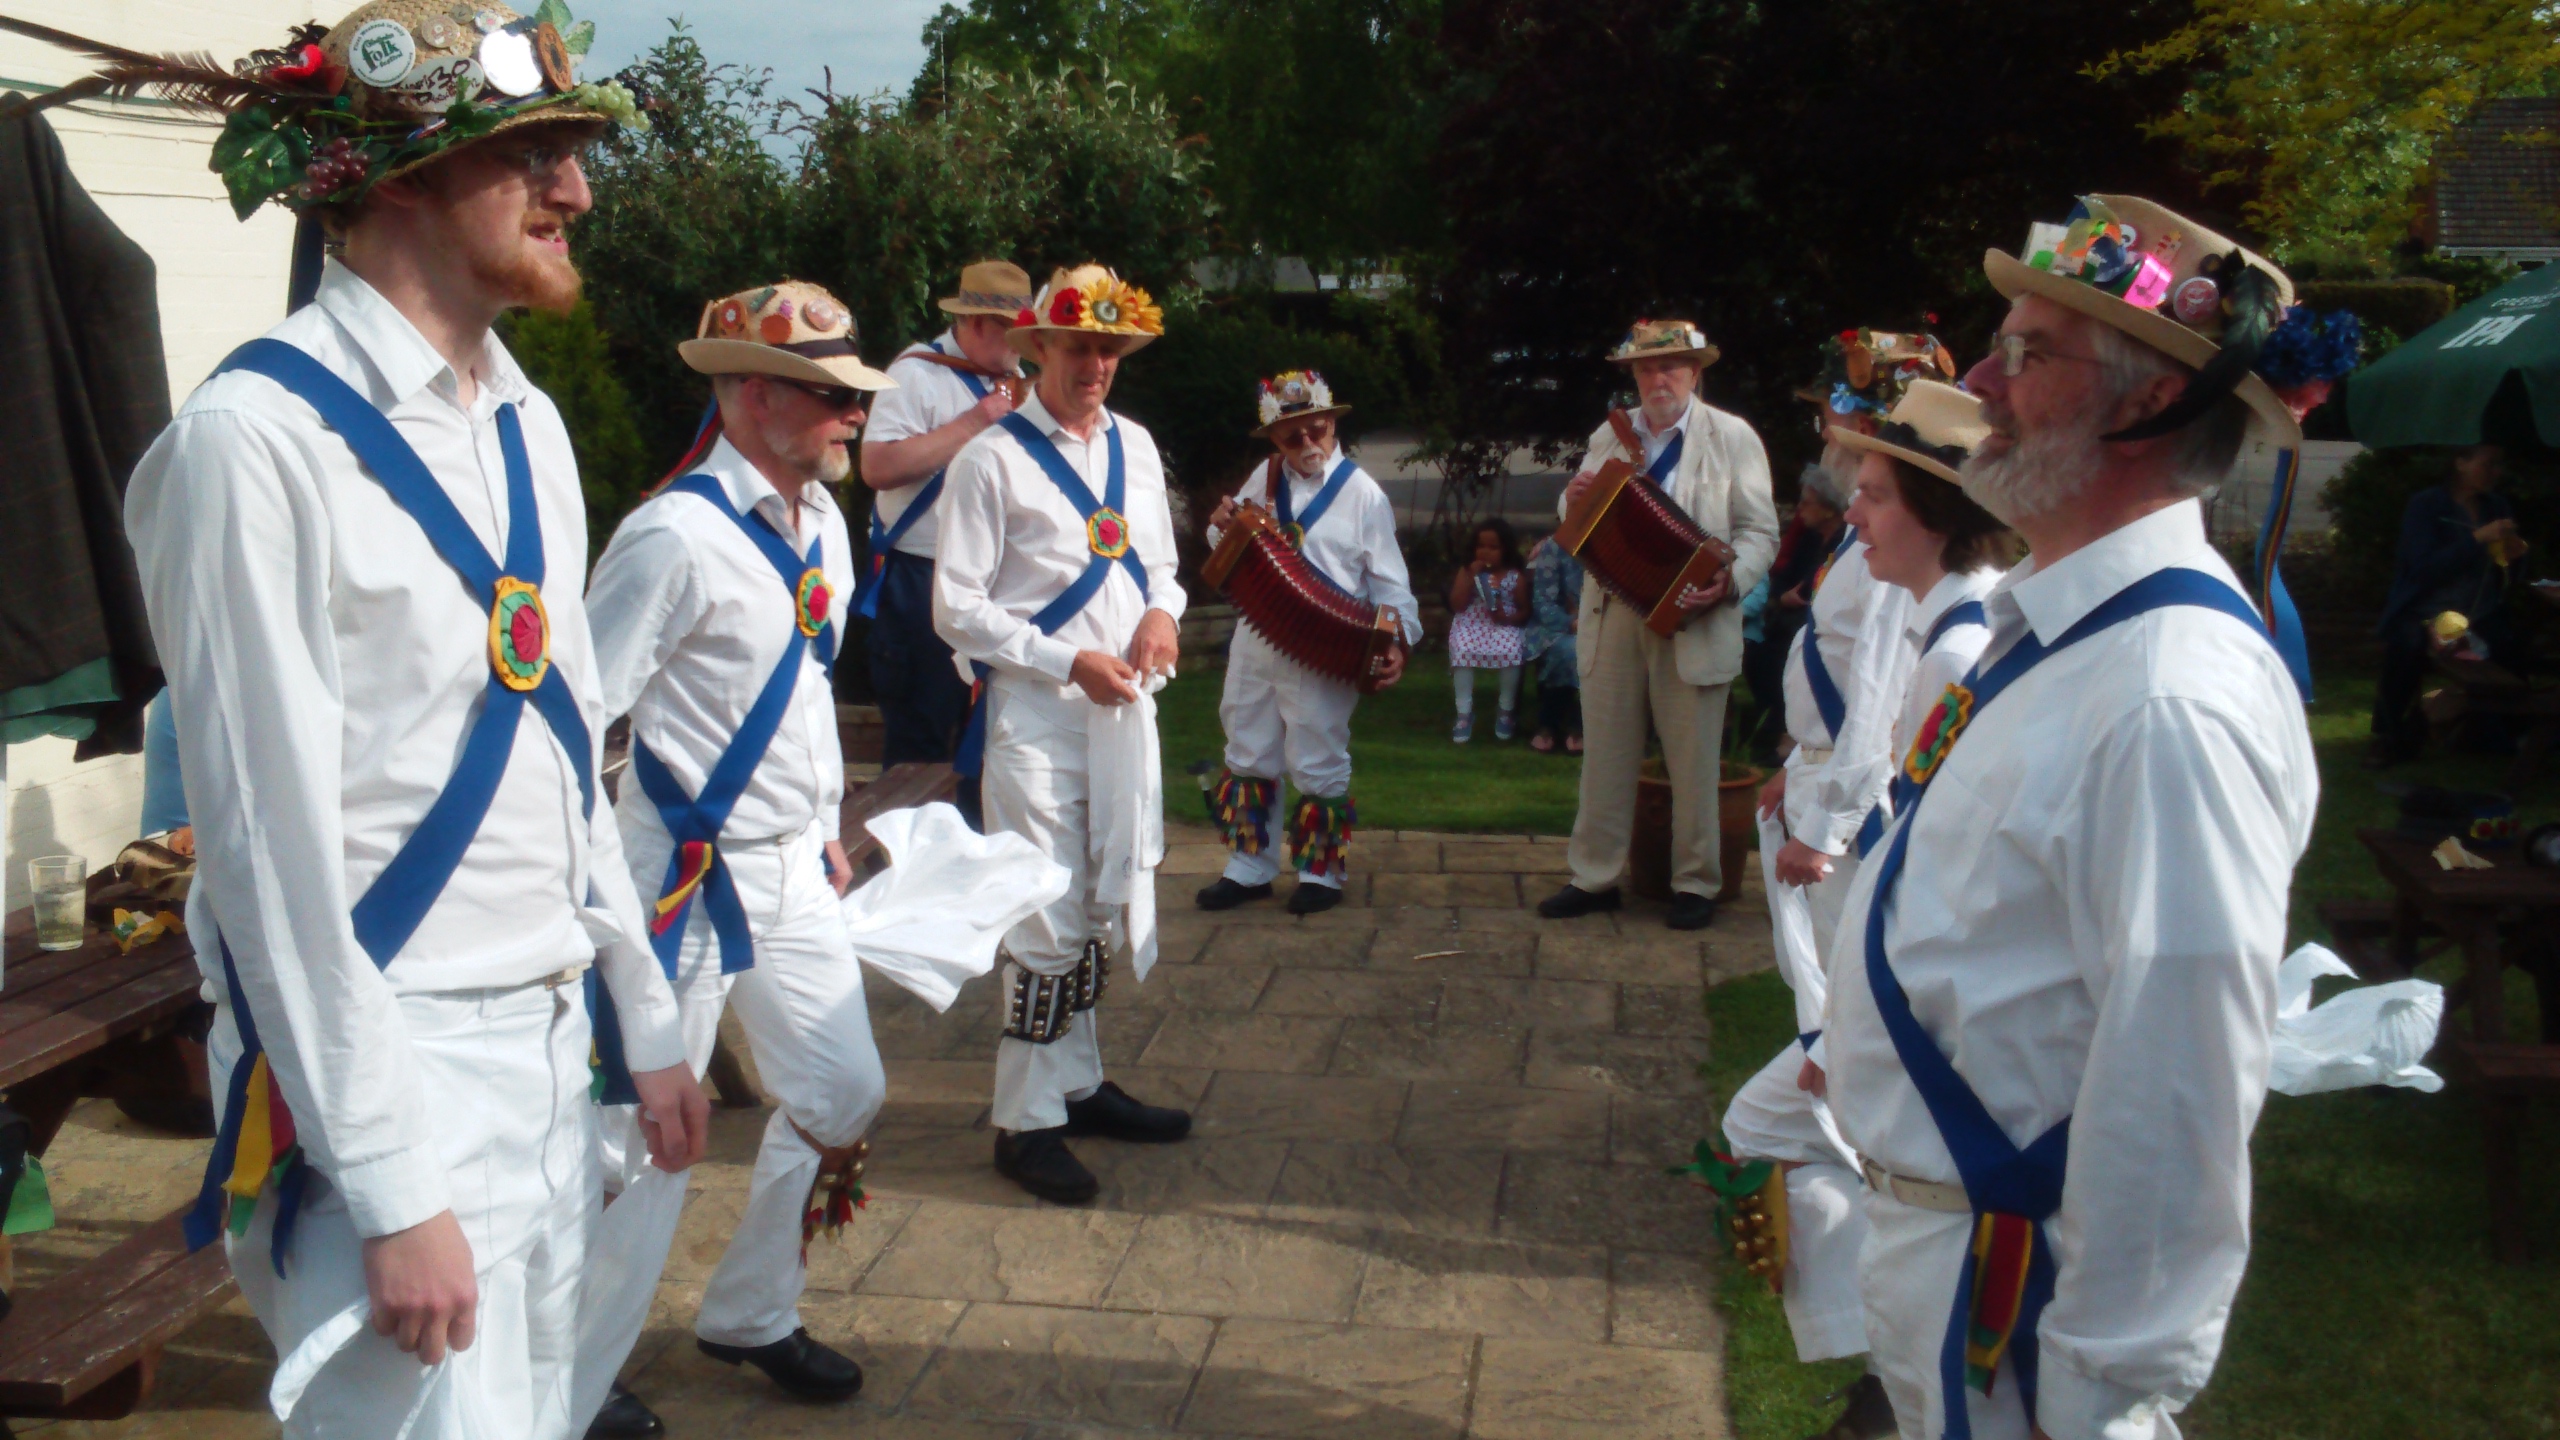 Preparing to Dance at Dancing at The Mary Arden in Wilmcote